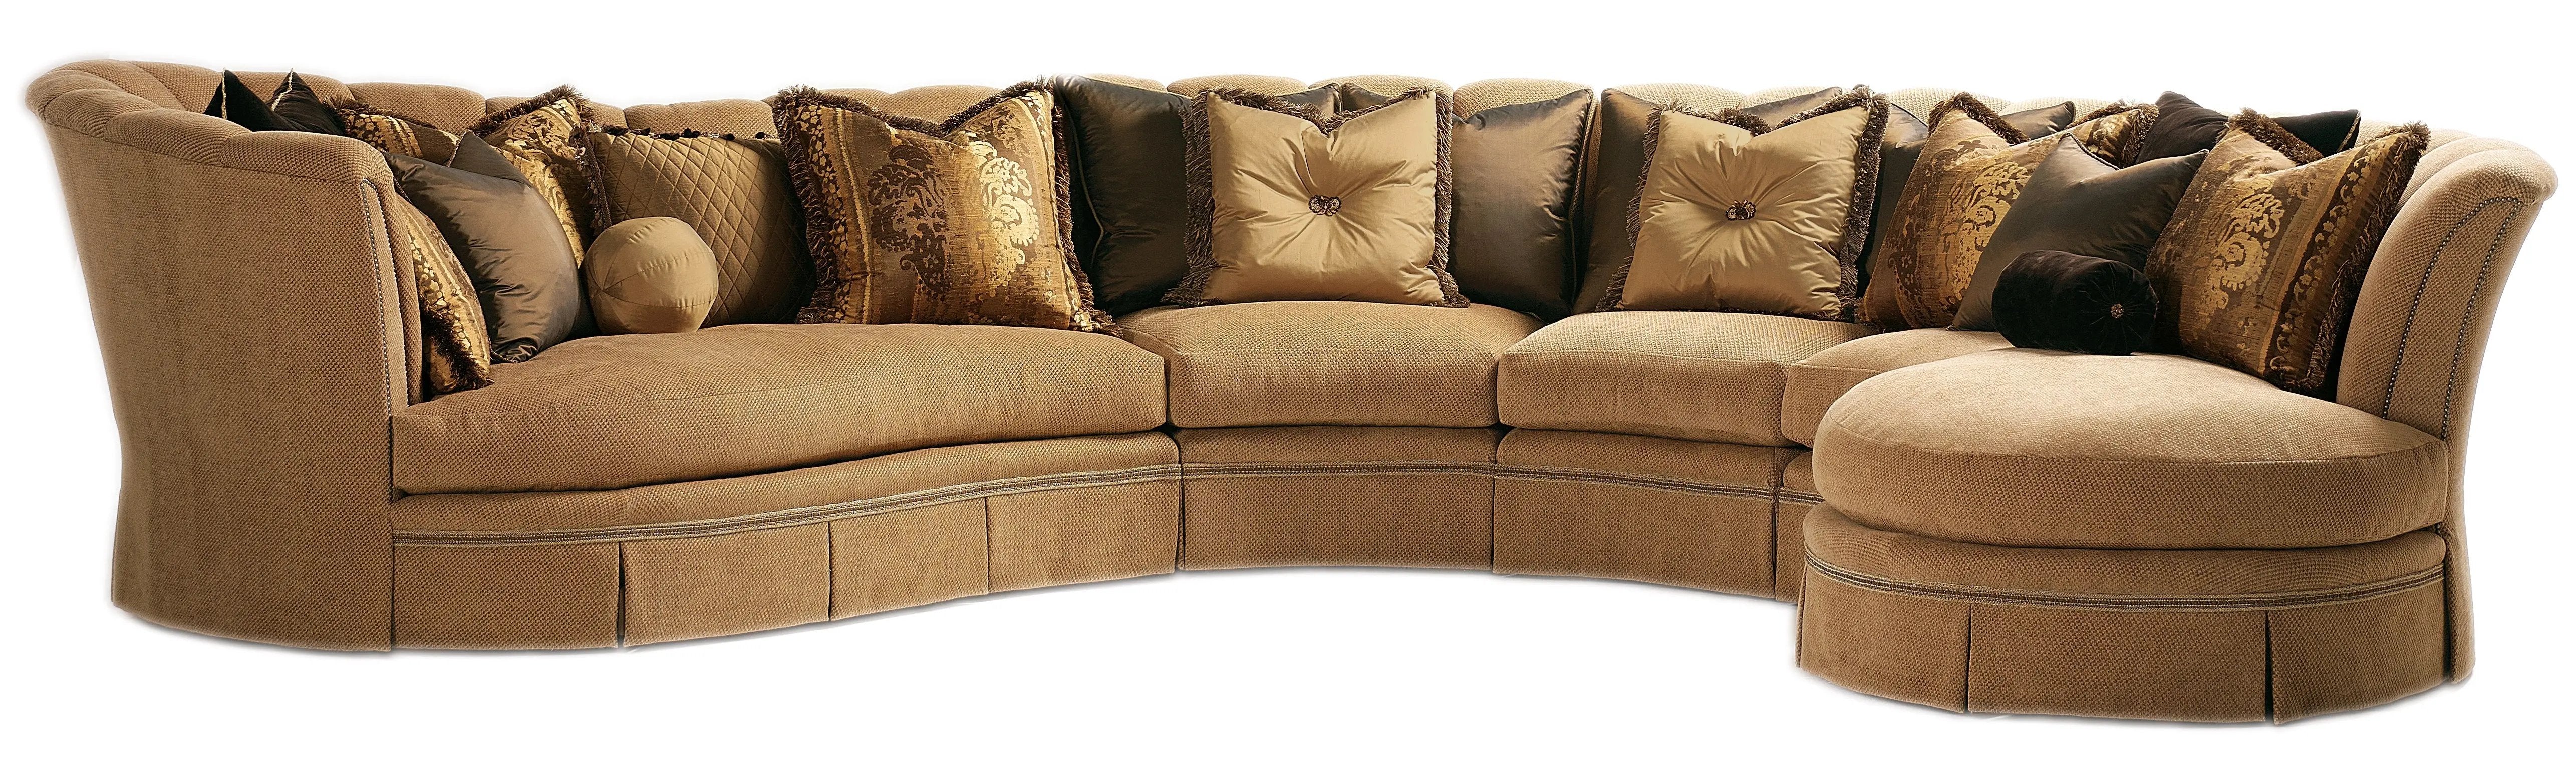 Marcheline Sectional